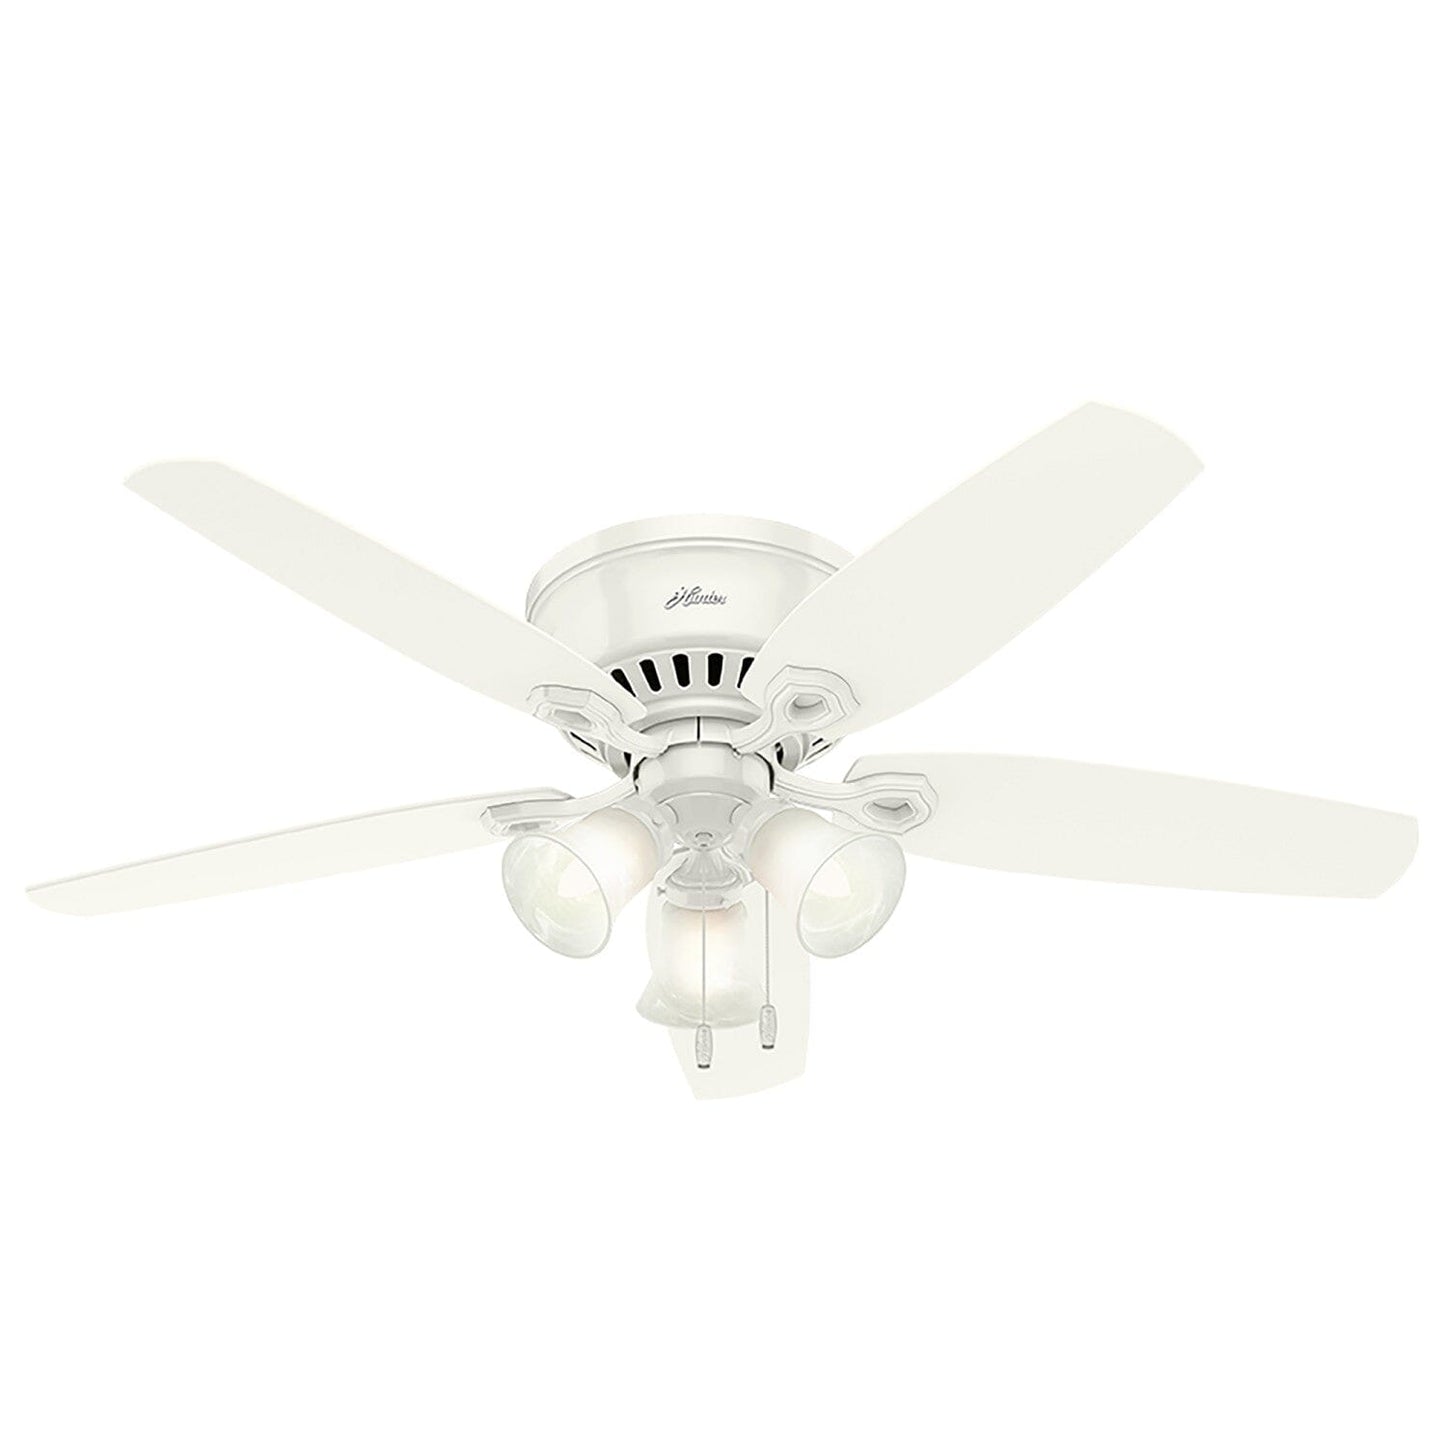 Builder Low Profile with 3 Lights 52 inch Ceiling Fans Hunter Snow White - Snow White 